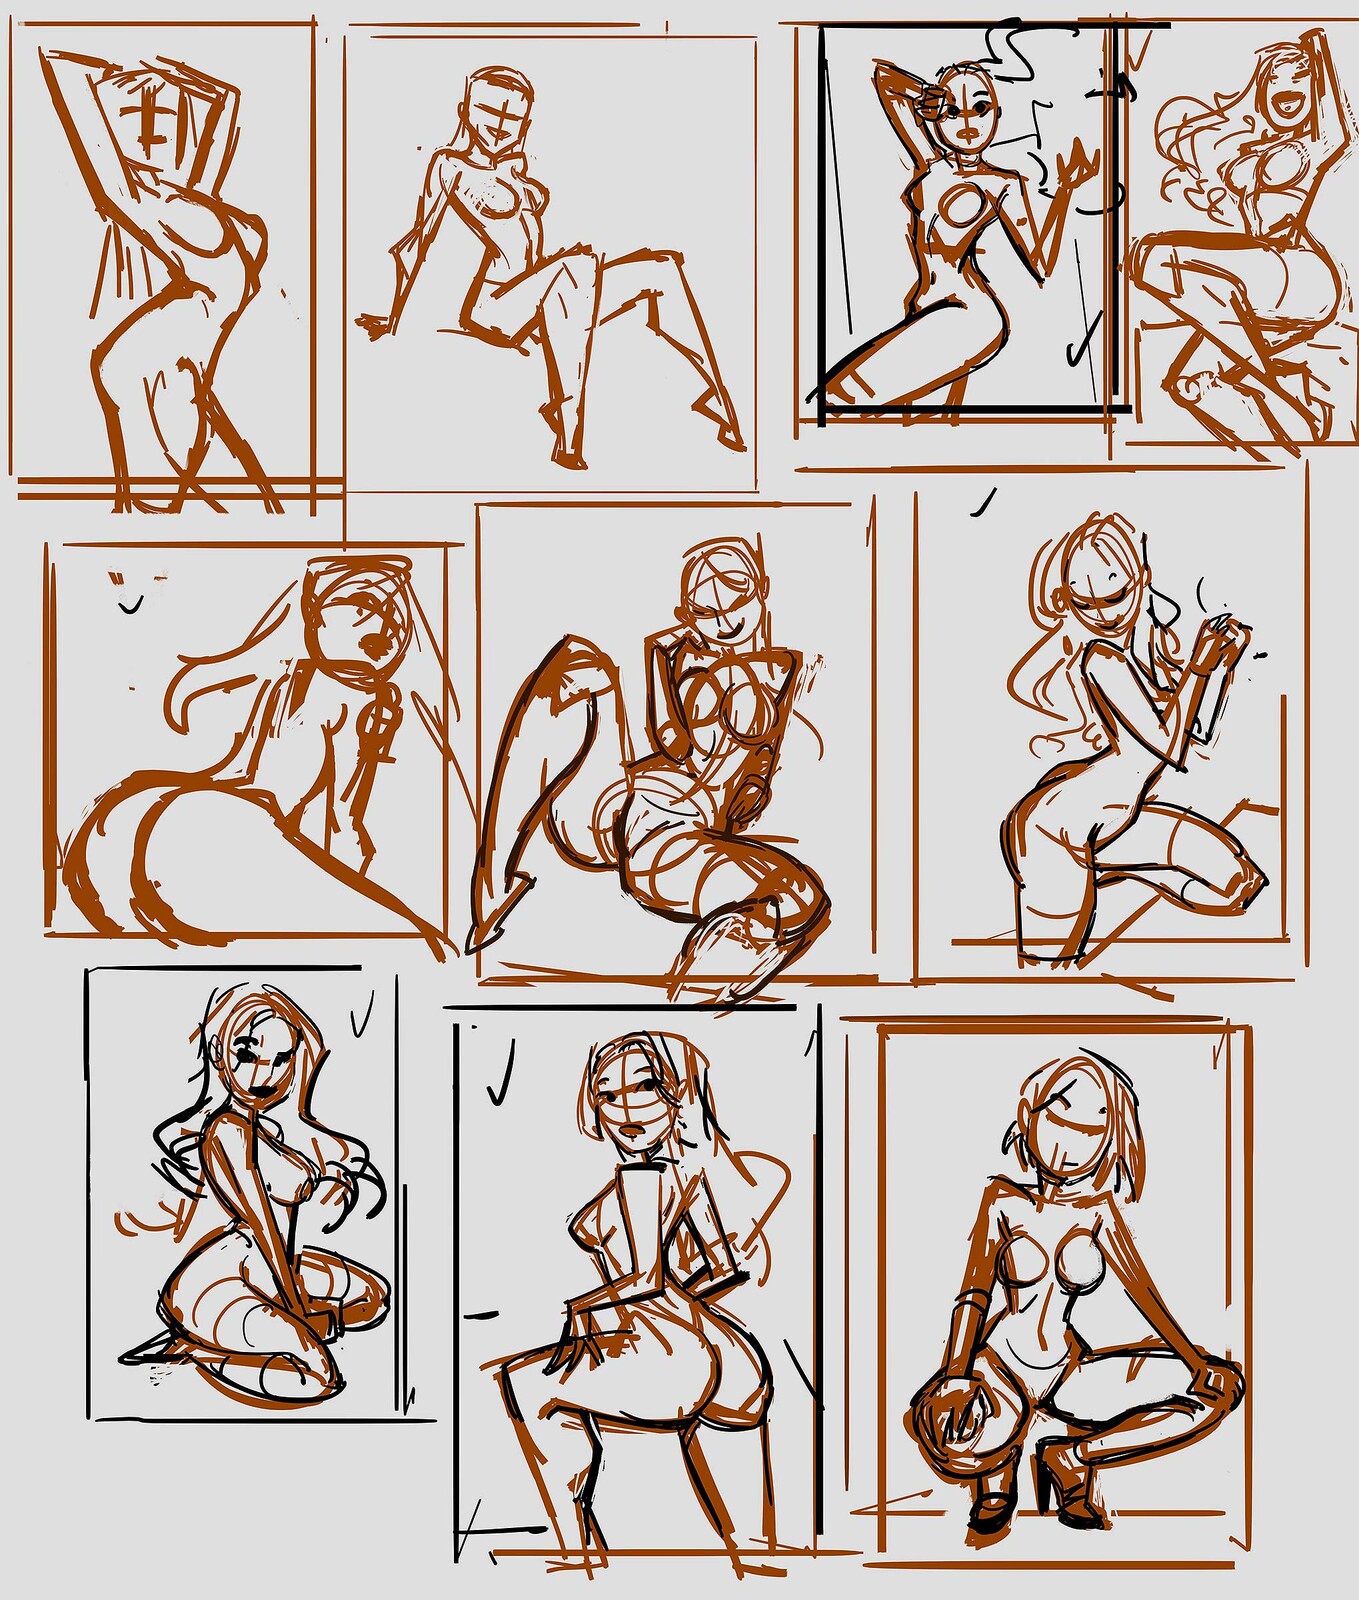 Rough Sketches, trying to get the right shapes and proportions. All based on Reference! 